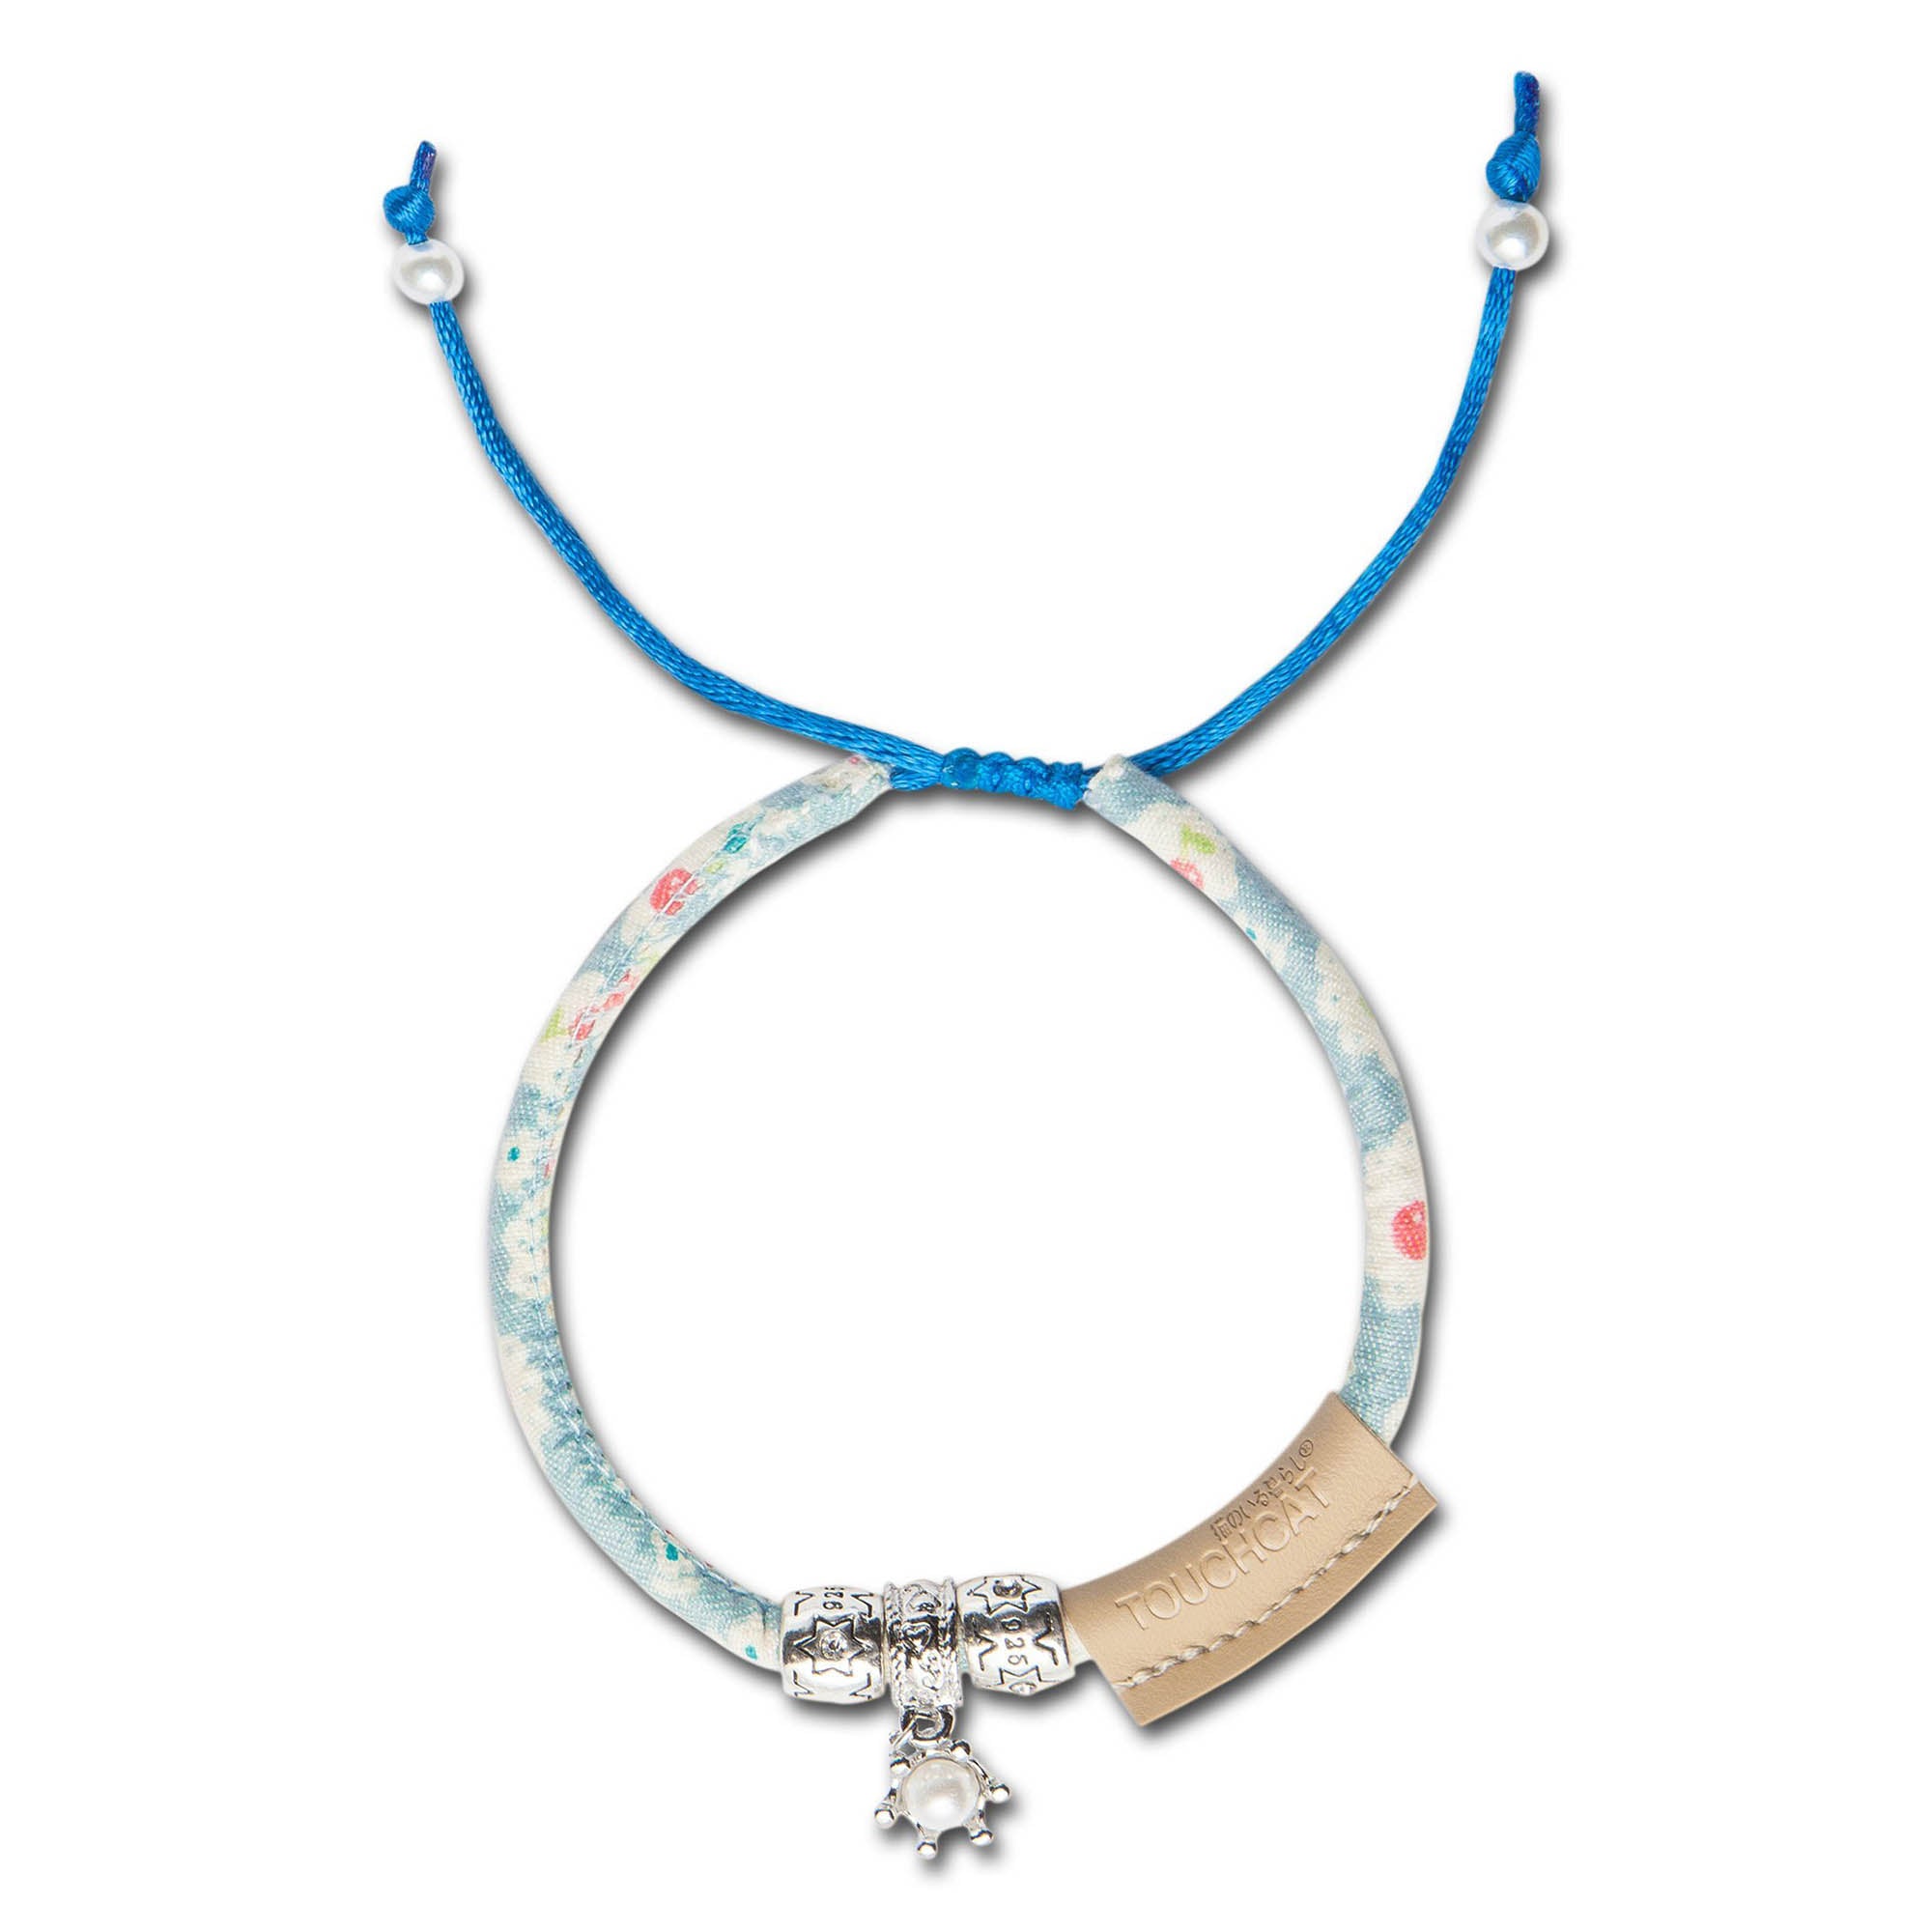 Touchcat Lucky Charms Designer Necklace Cat Collar - Blue